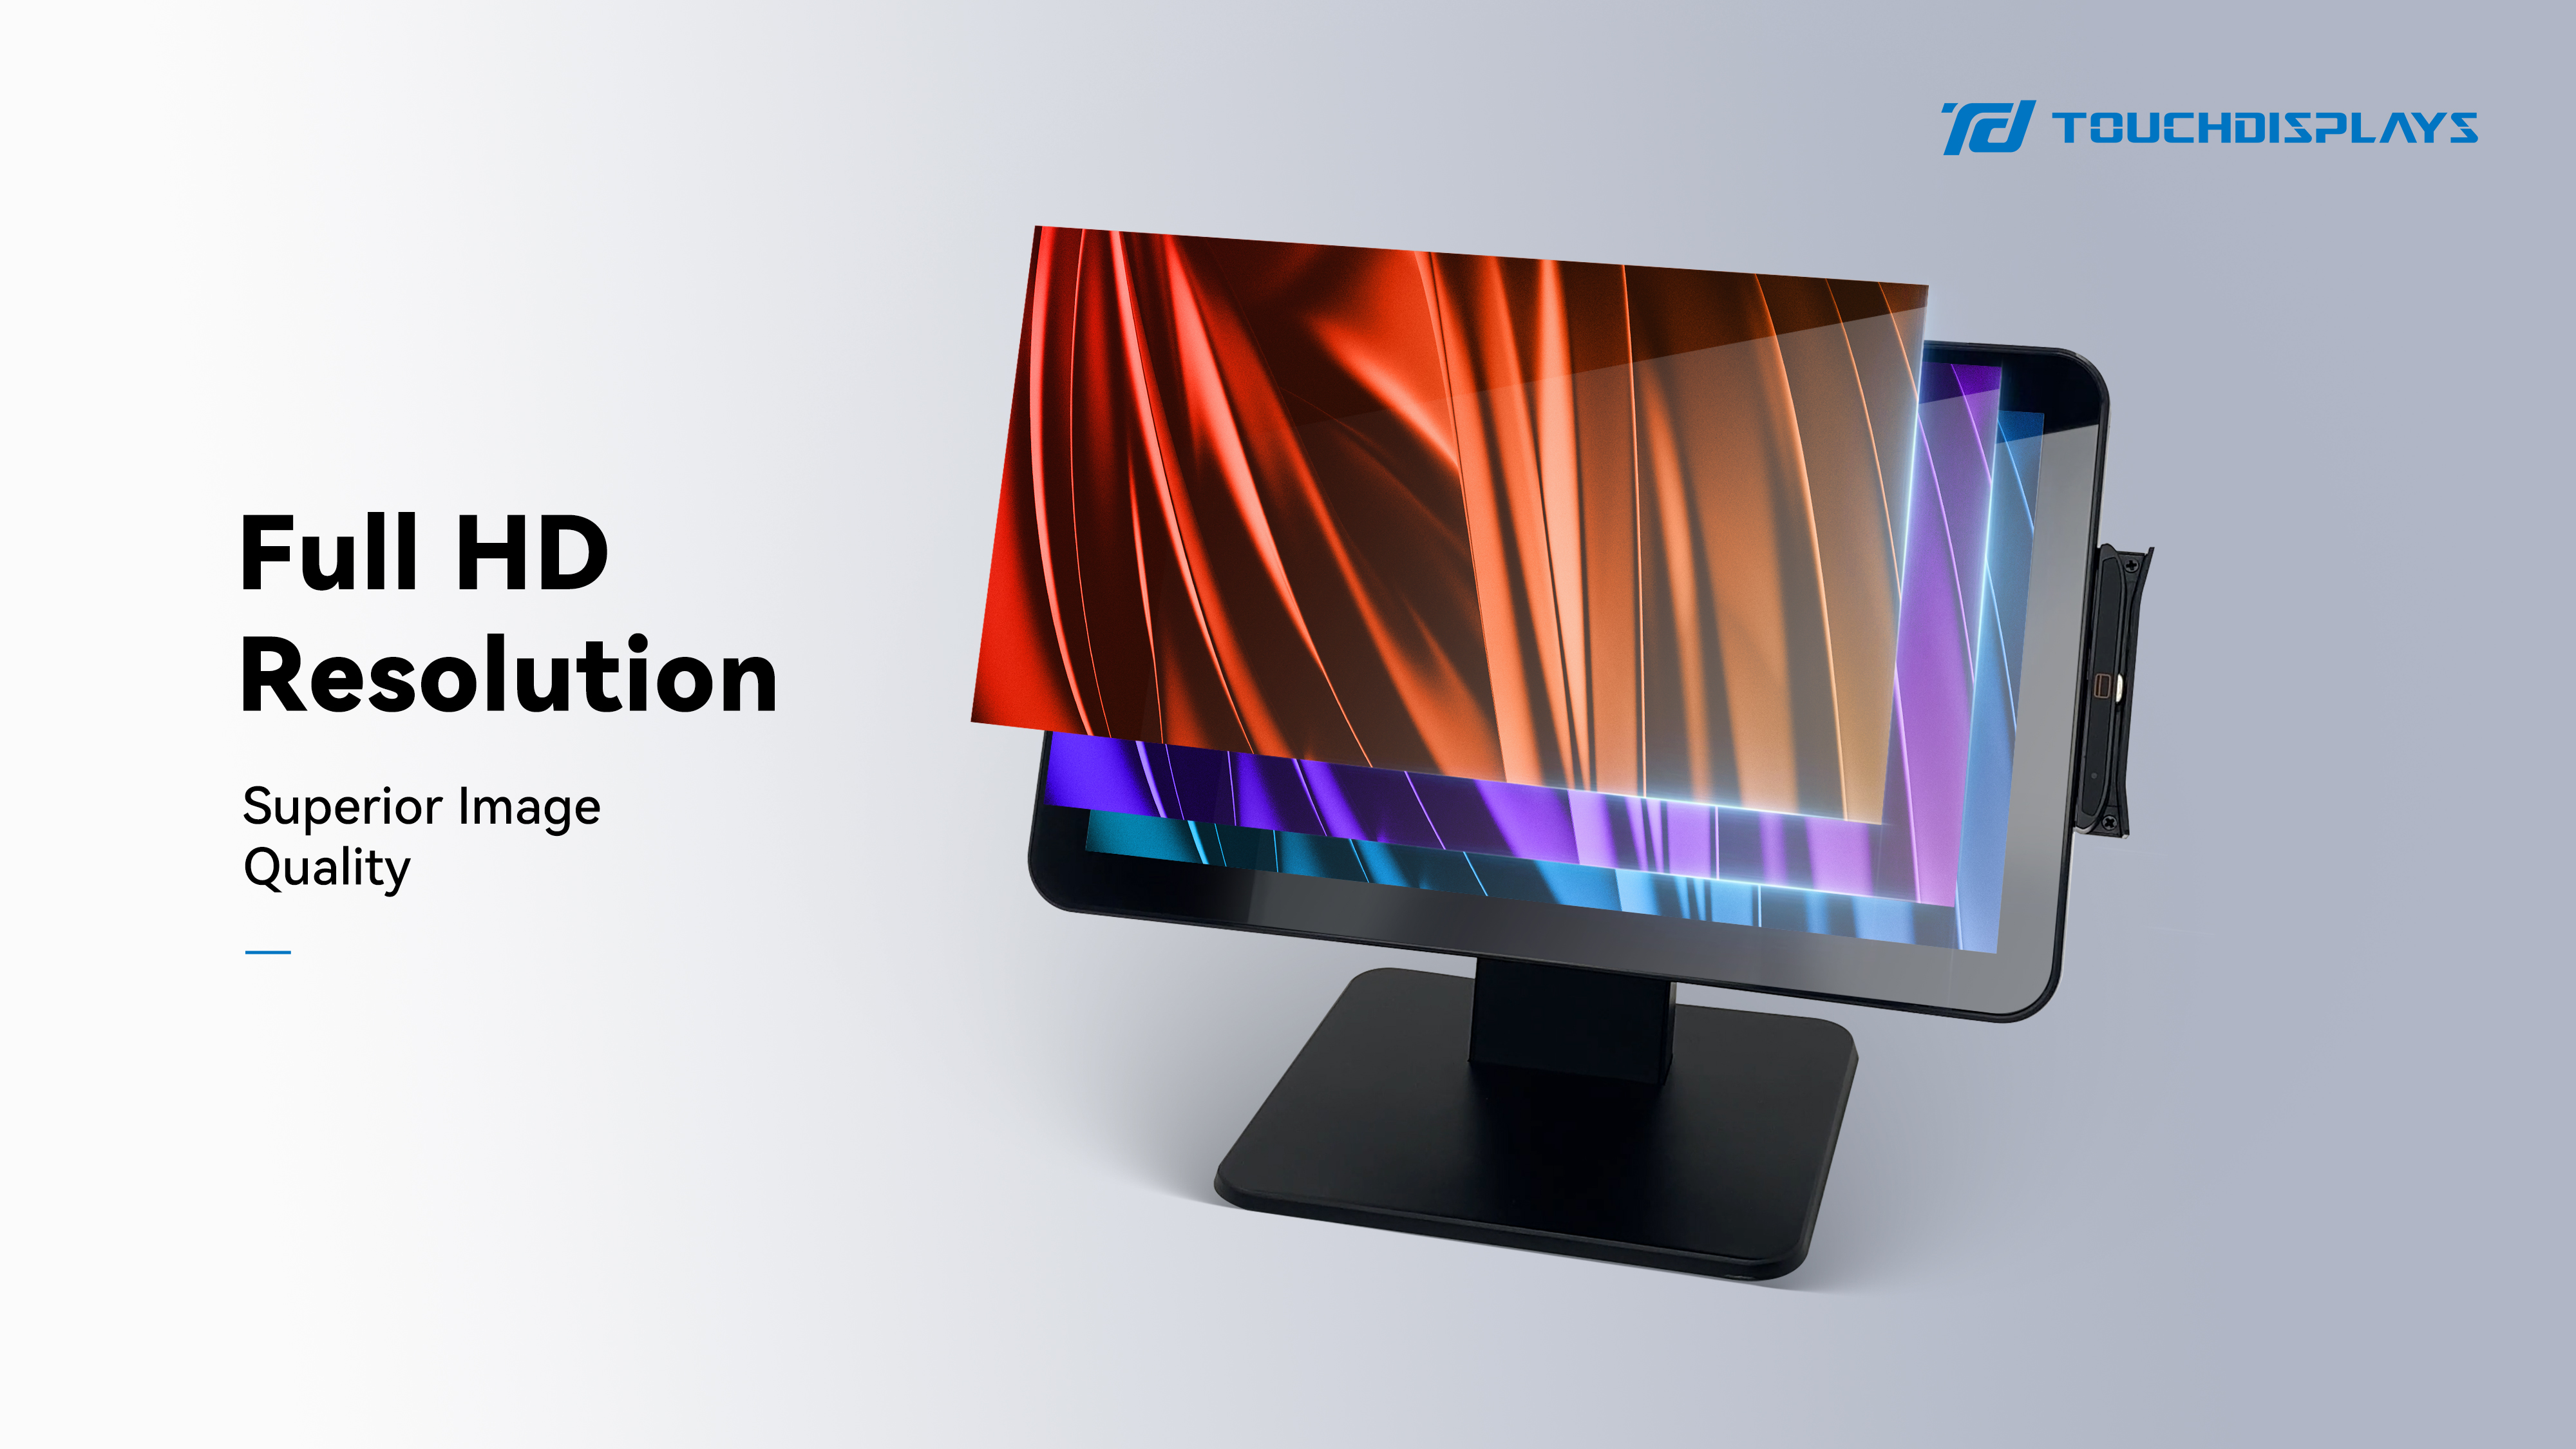 What is 1080p resolution?